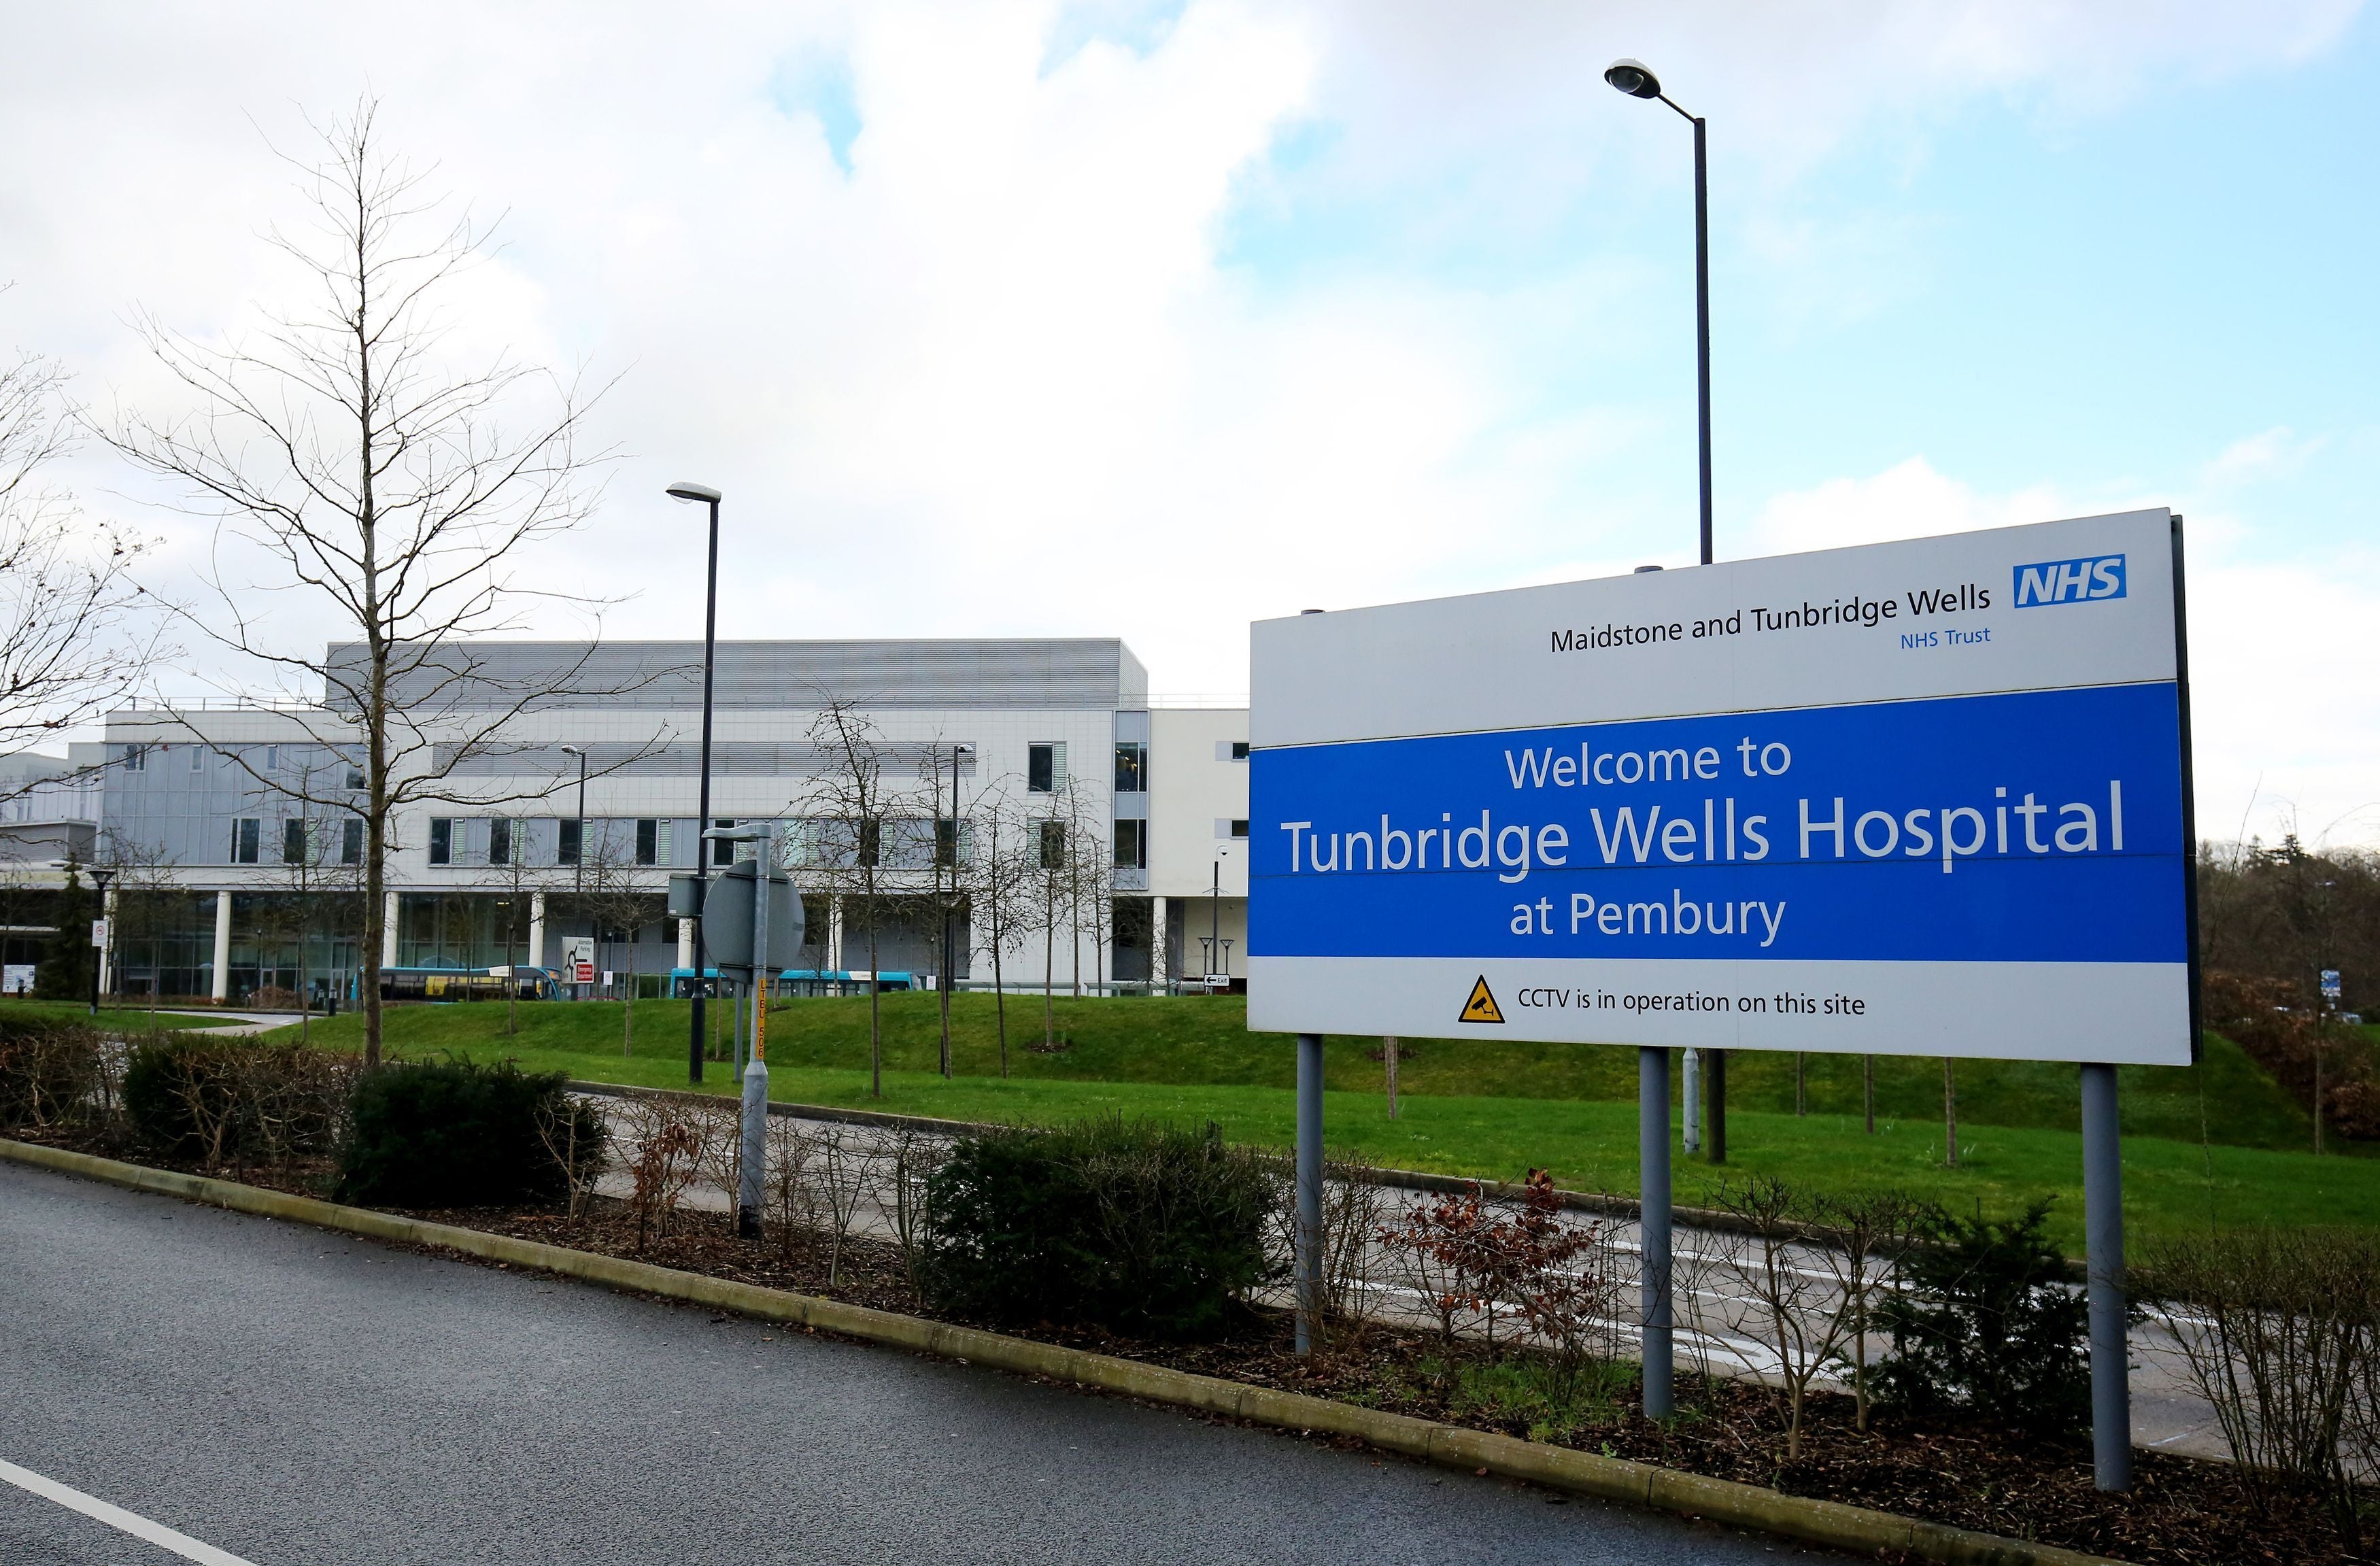 Leaders at the Maidstone and Tunbridge Wells NHS Trust have been told ‘to reflect seriously and carefully on their responsibility for the weaknesses and failings’ identified